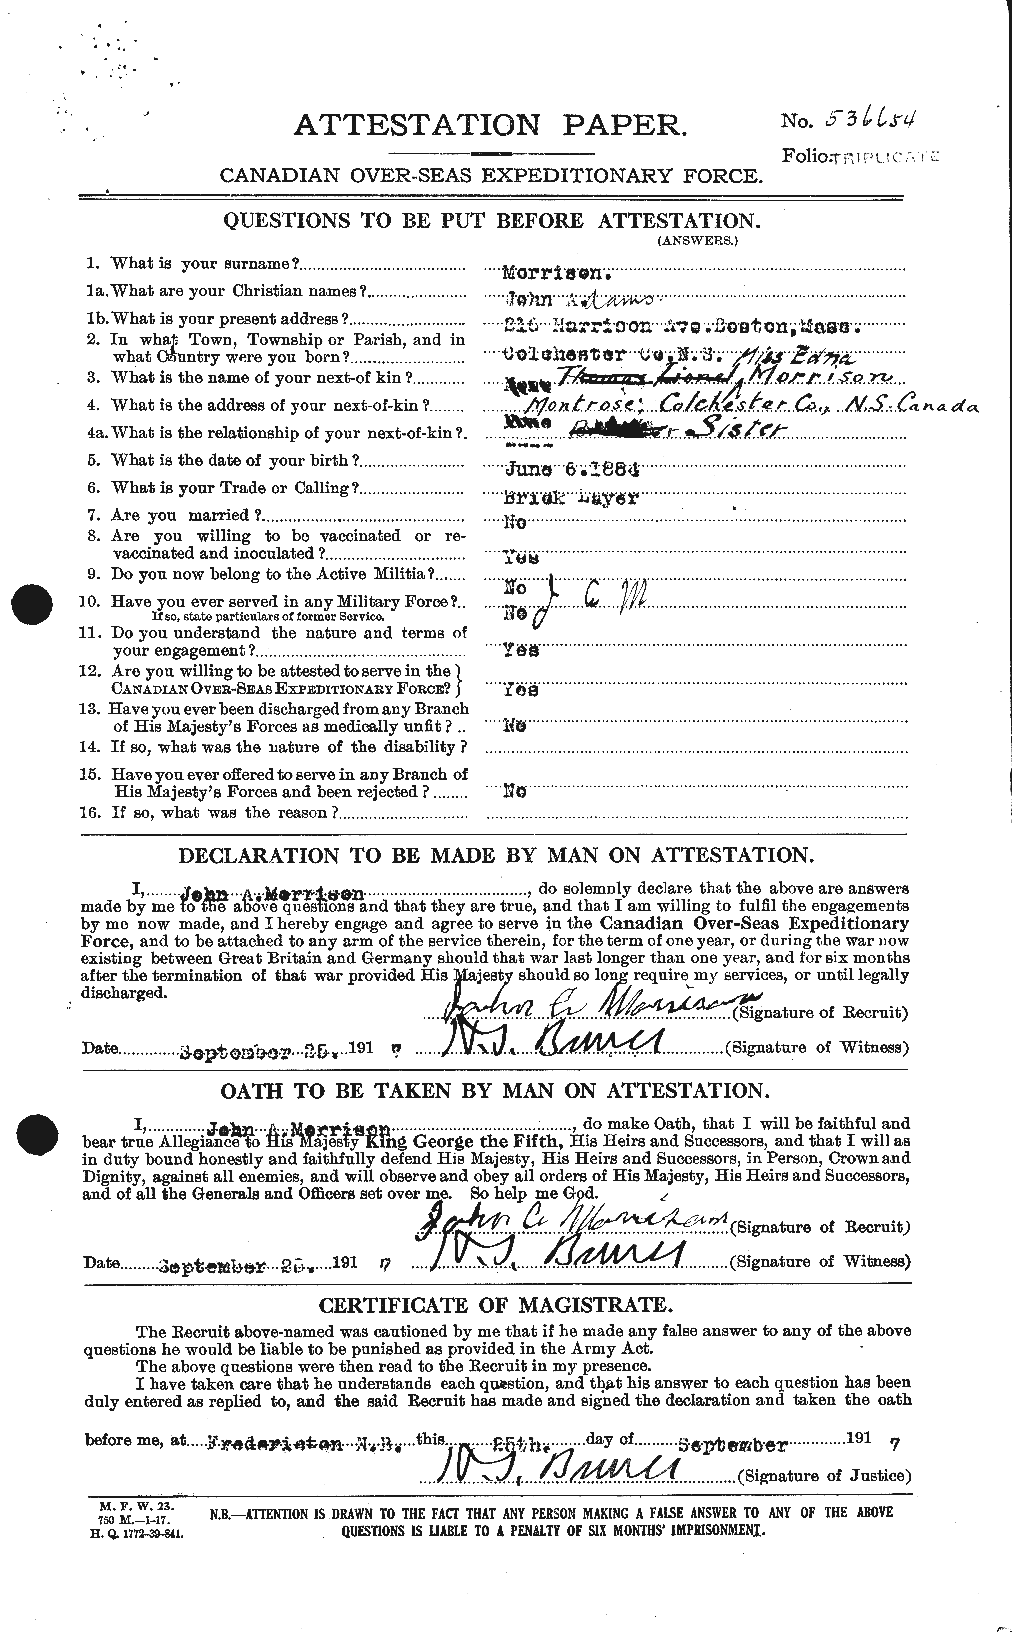 Personnel Records of the First World War - CEF 507007a